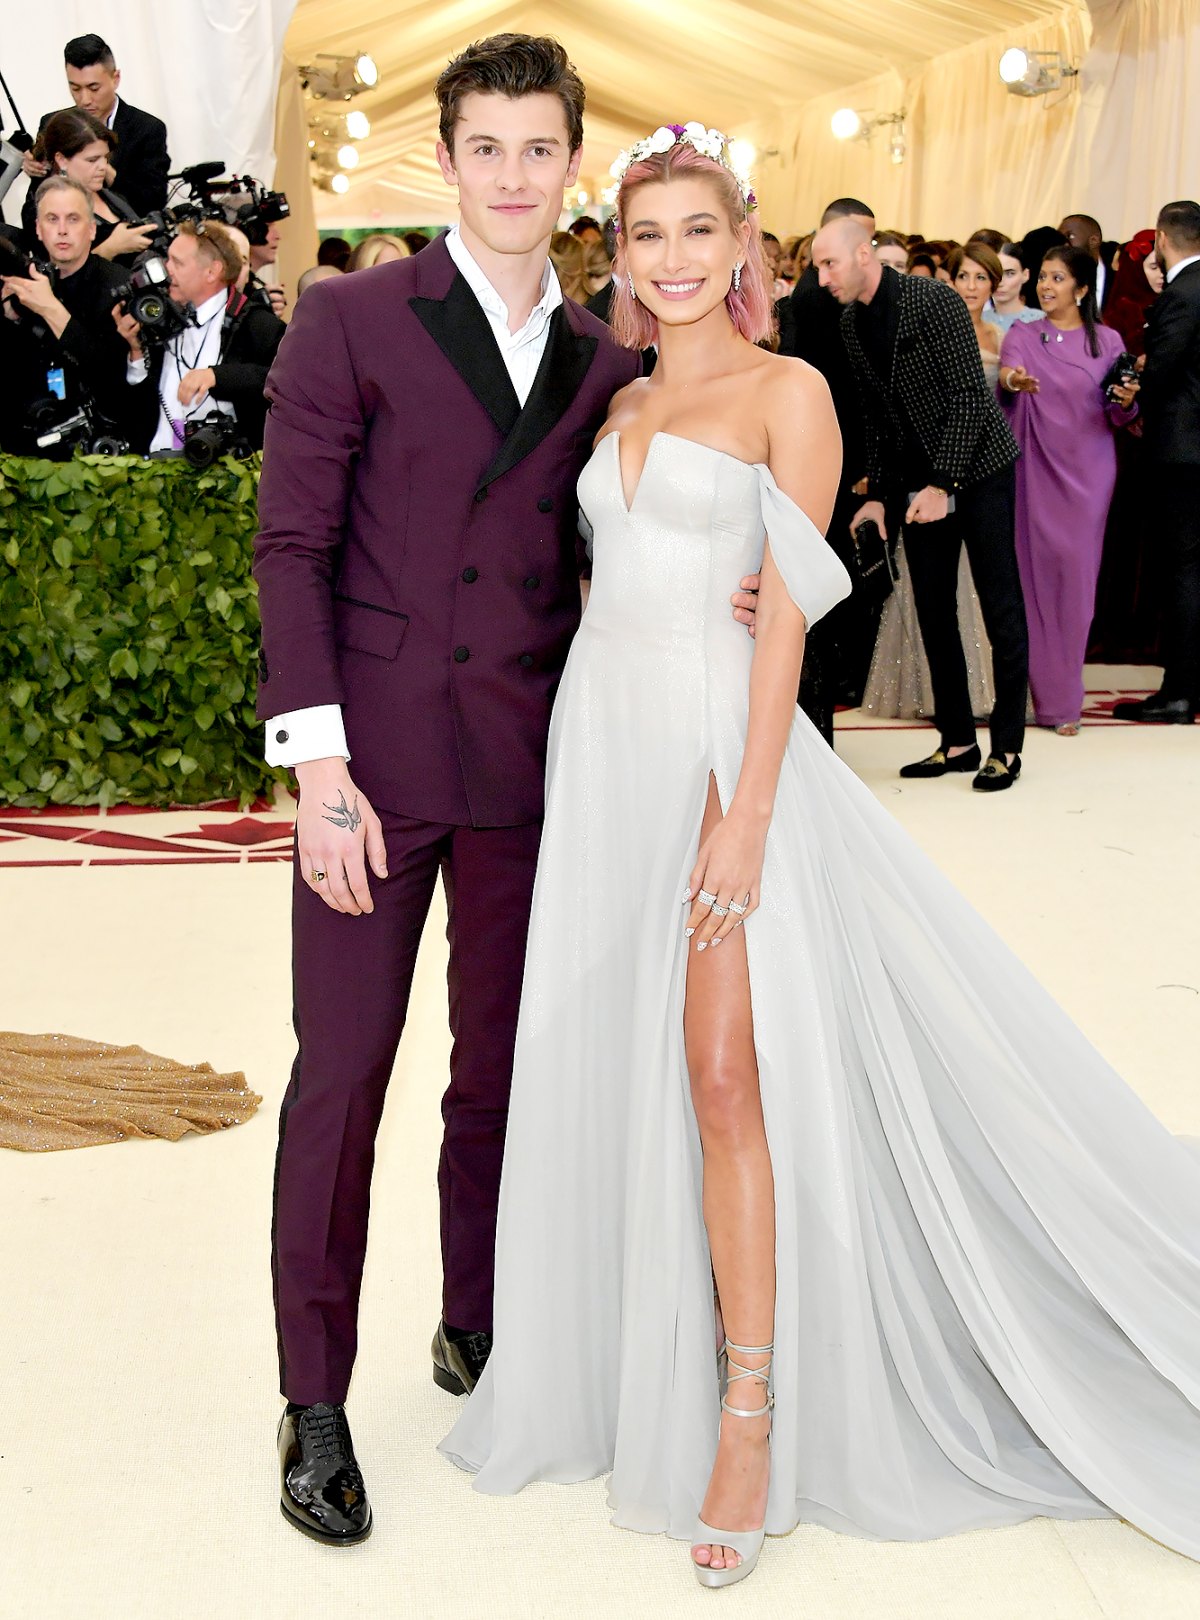 Shawn Mendes on Attending 2018 Met Gala With Hailey Baldwin